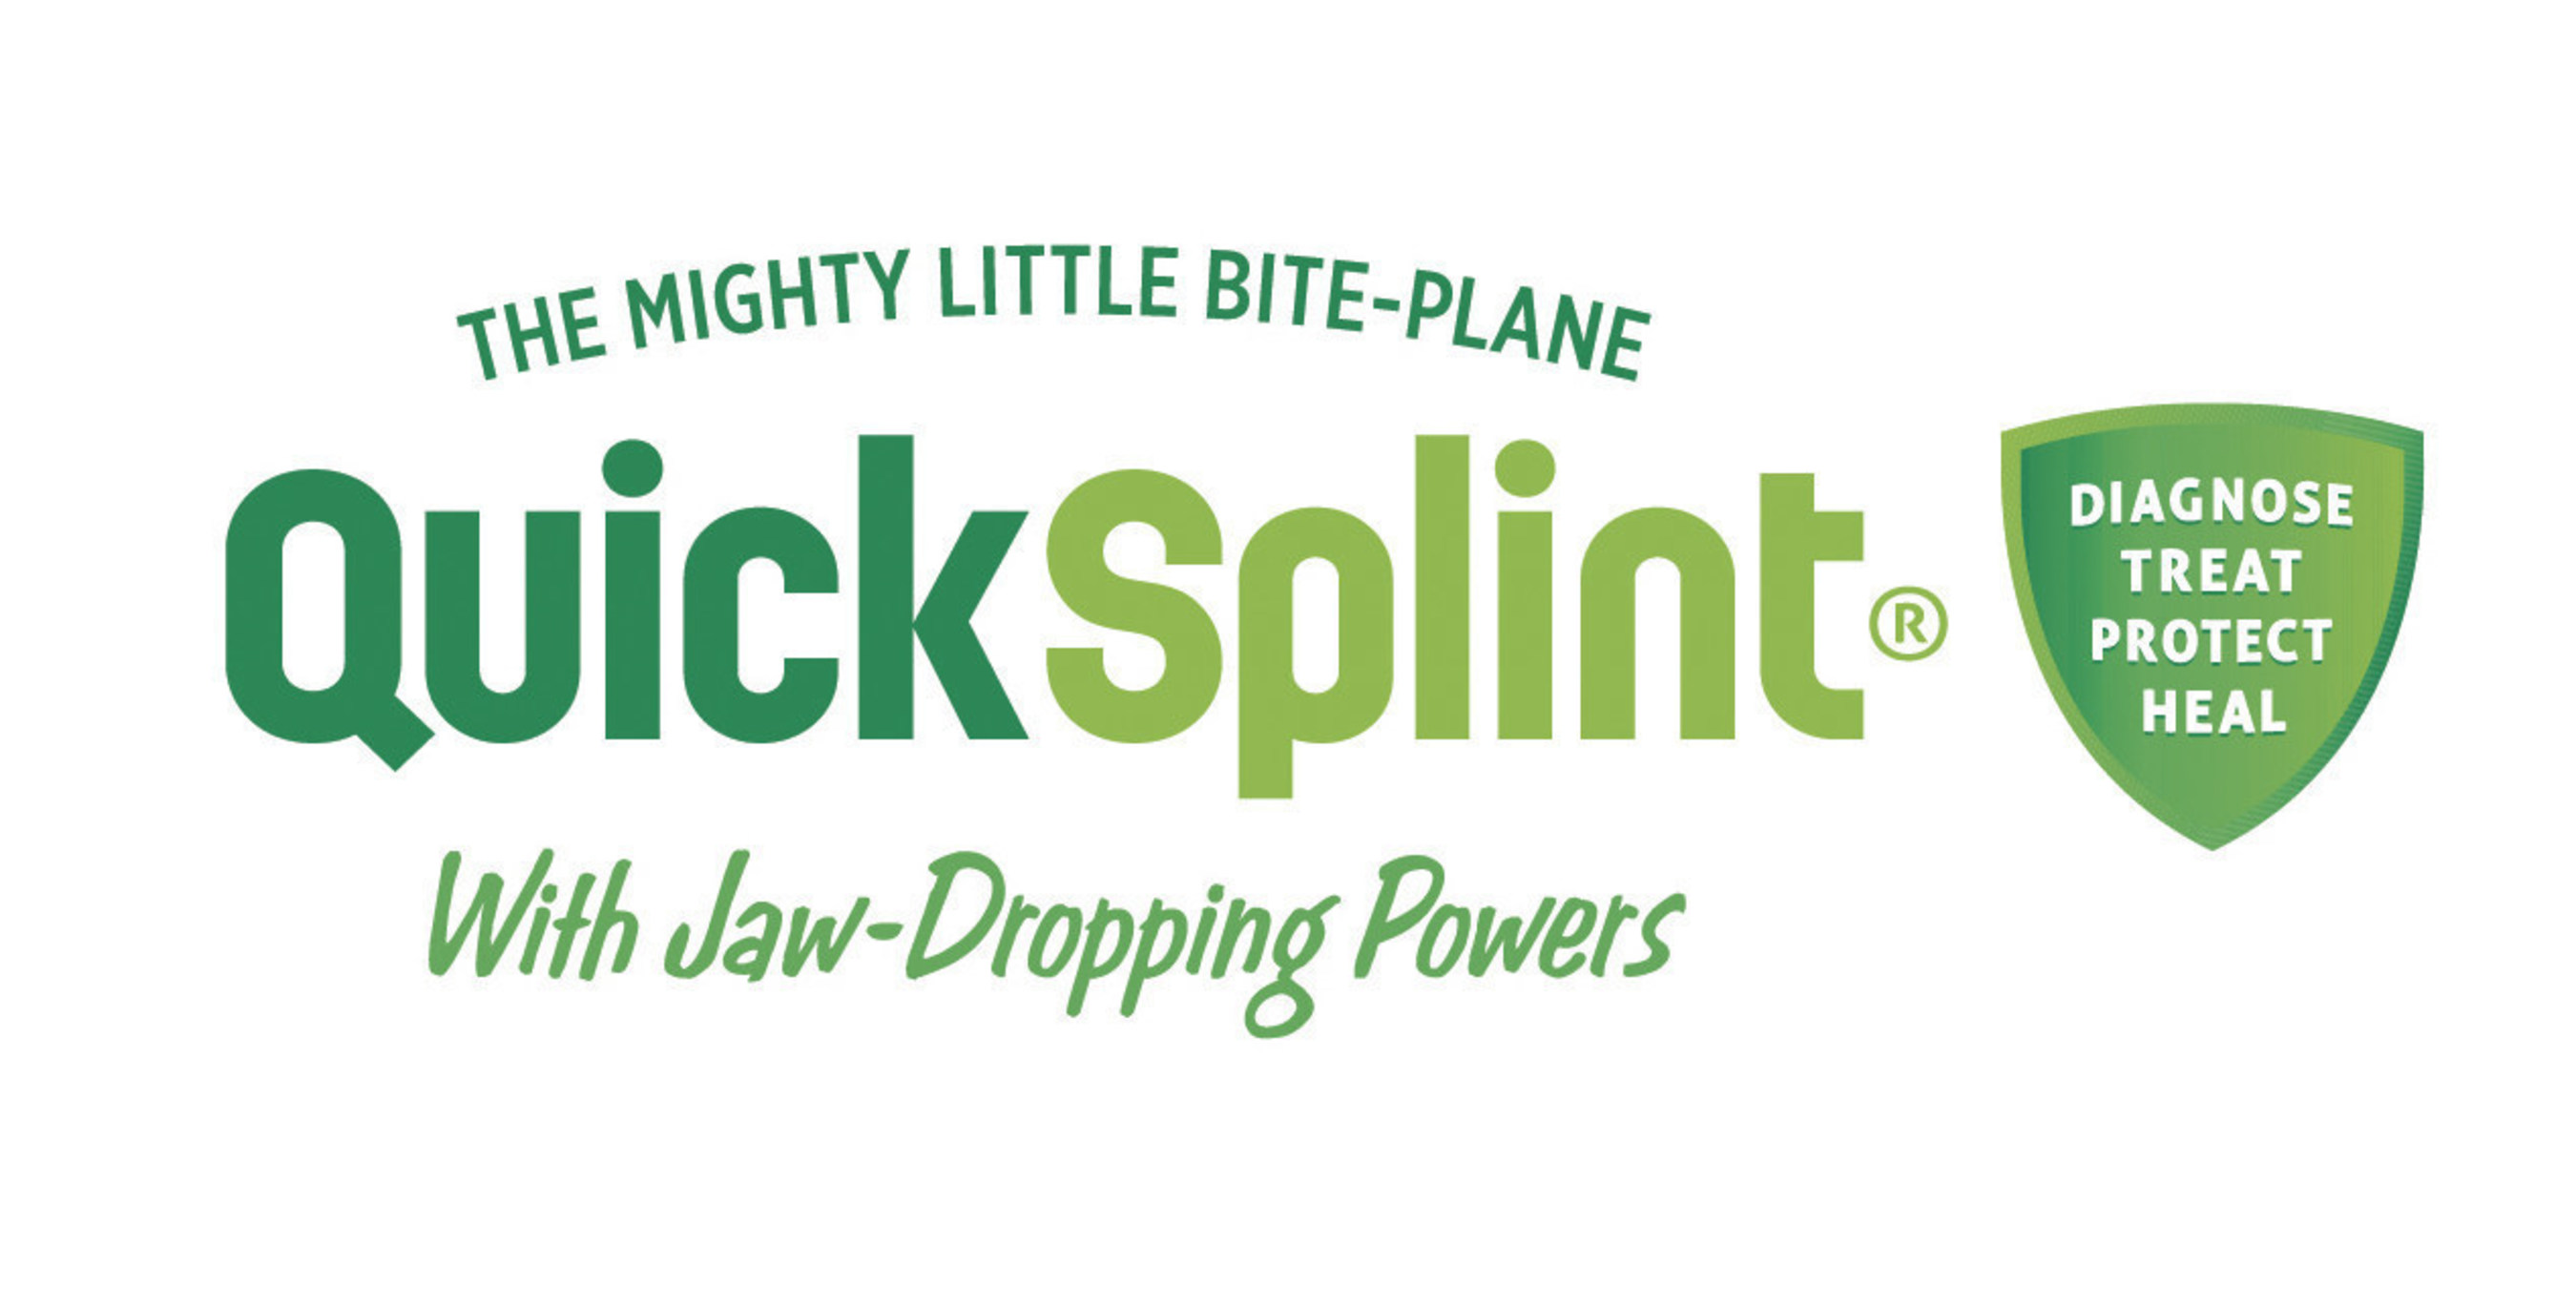 QuickSplint, the Mighty Little Bite-Plane with Jaw-Dropping Powers, is a healing and protective aid that has dozens of practical applications across dentistry.